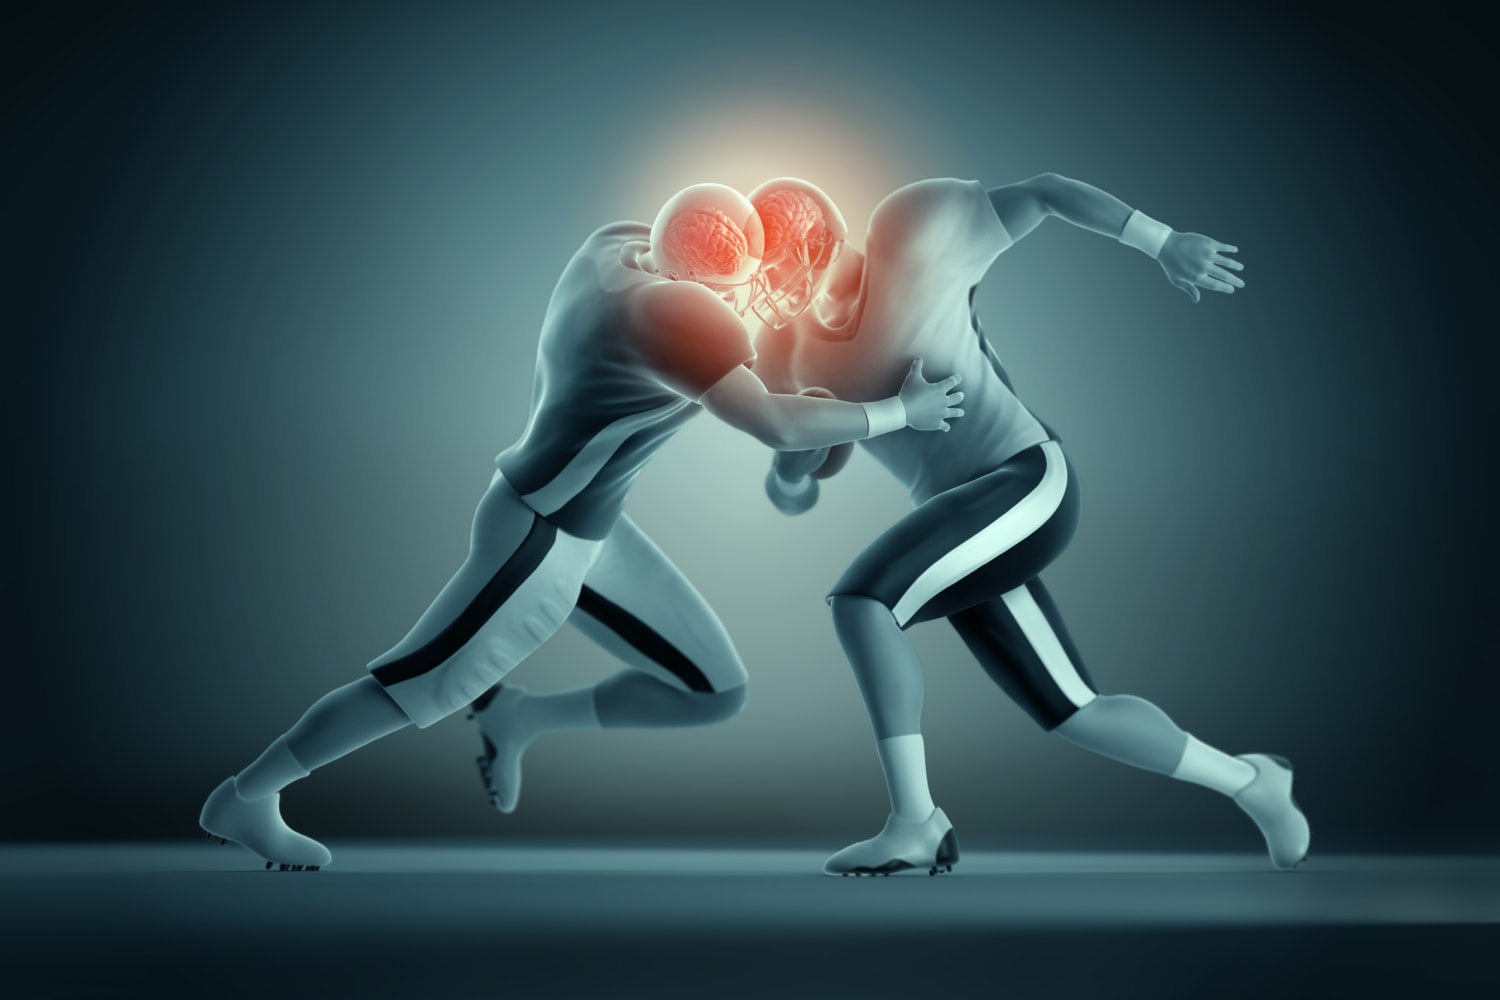 Can Science Solve Football's Concussion Crisis?